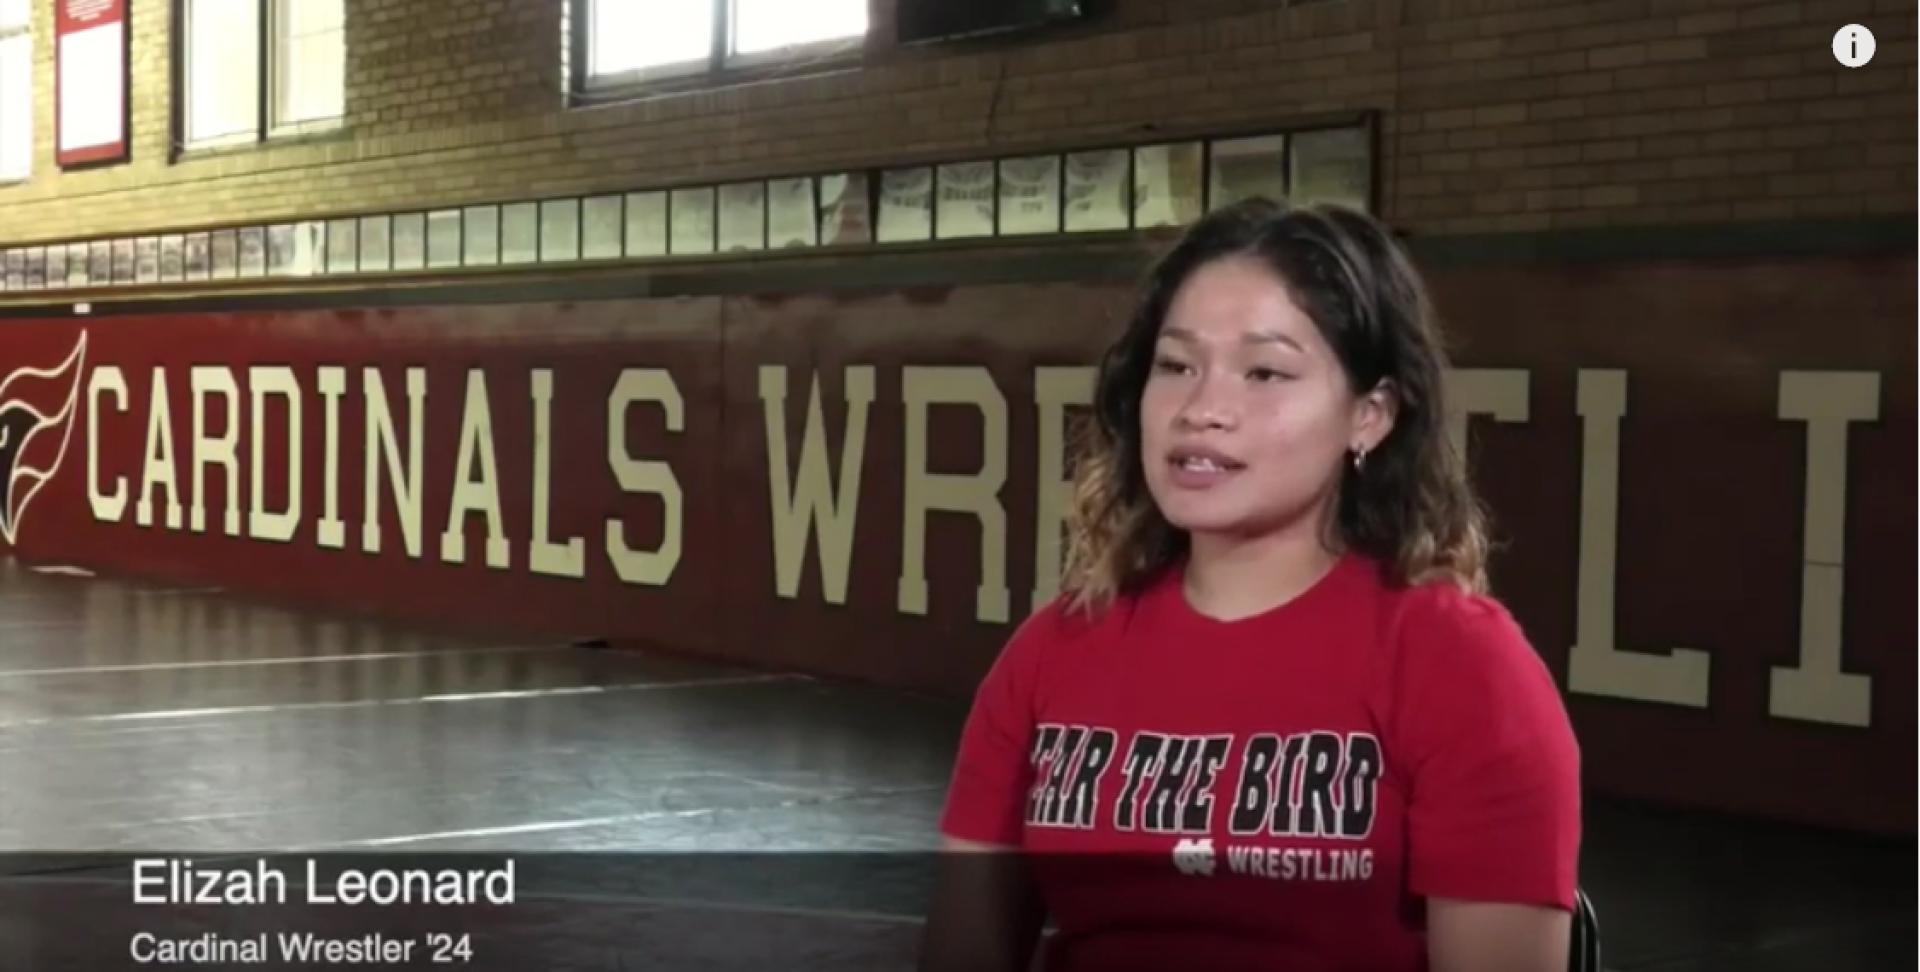 North Central College women's wrestler Elizah Leonard appears in a Be the Change video.